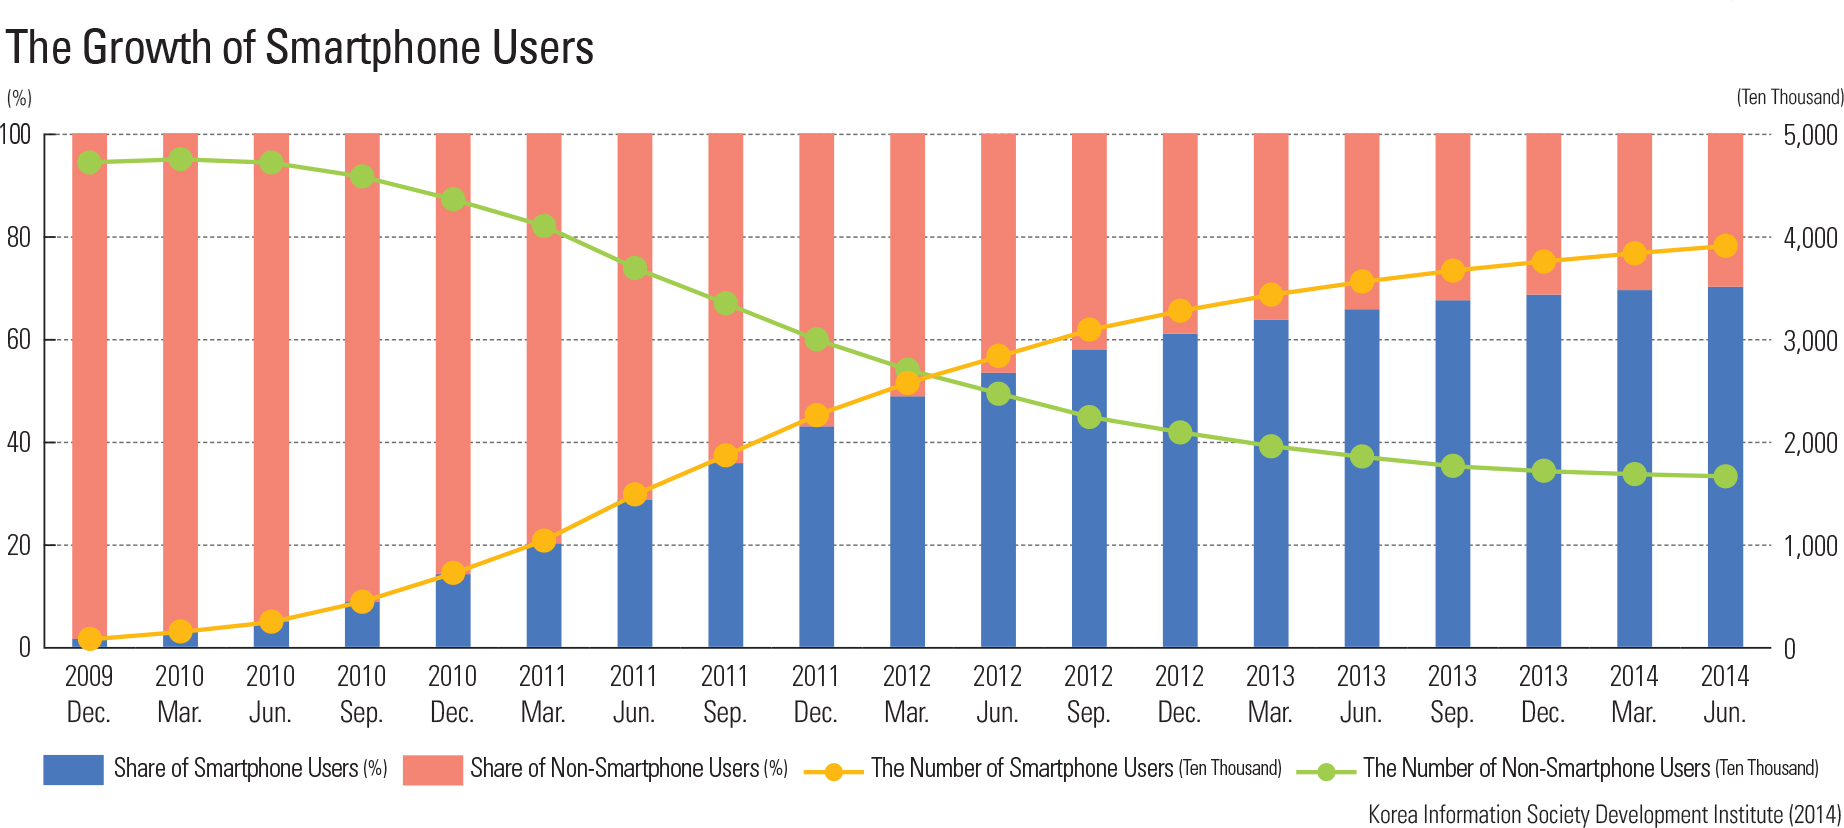 The Growth of Smartphone Users